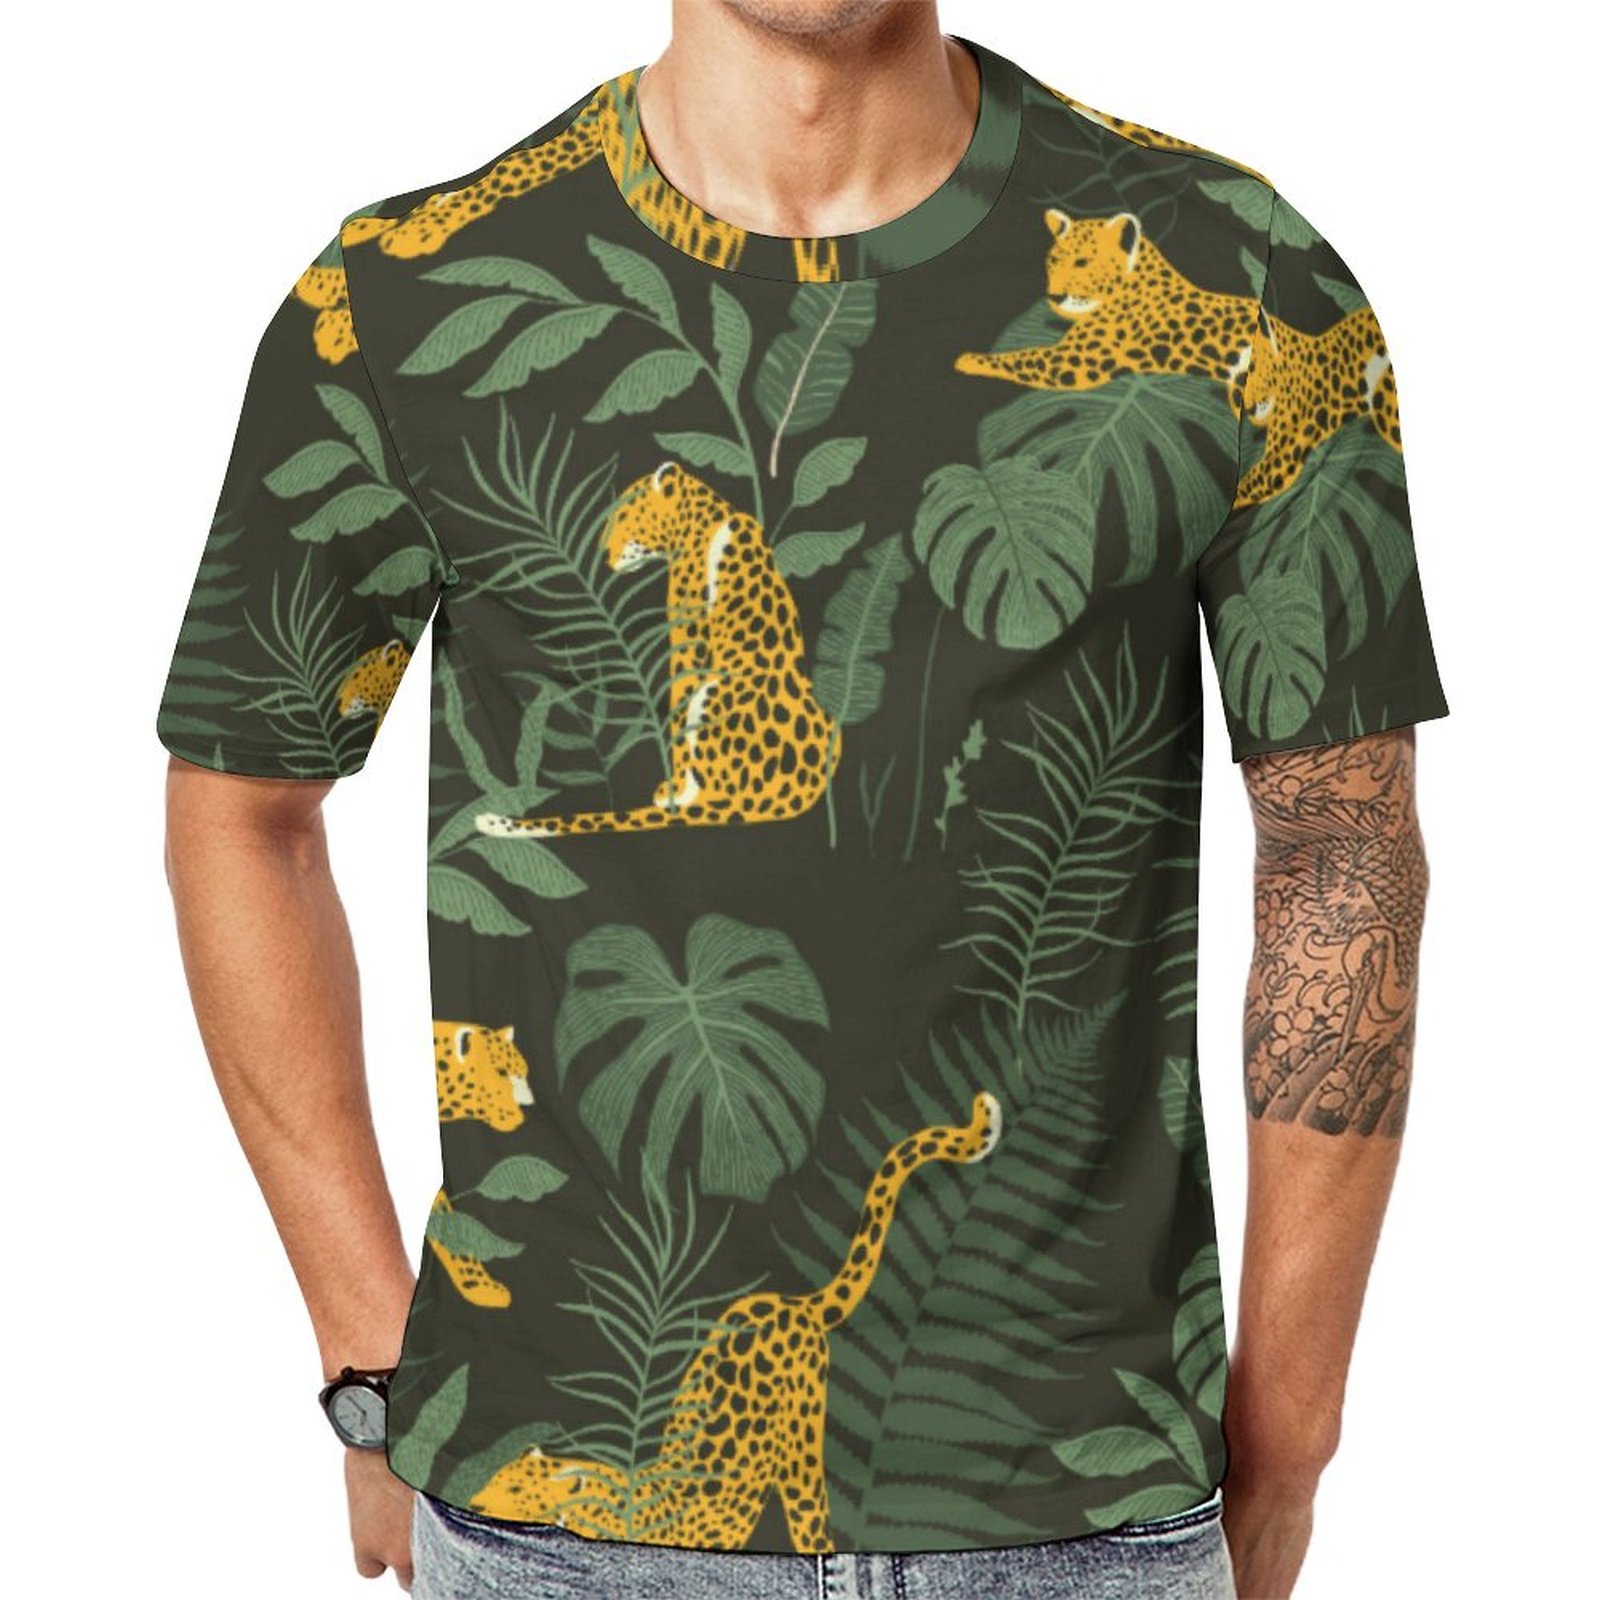 Exotic Tropical Green Leave Jaguar Short Sleeve Print Unisex Tshirt Summer Casual Tees for Men and Women Coolcoshirts